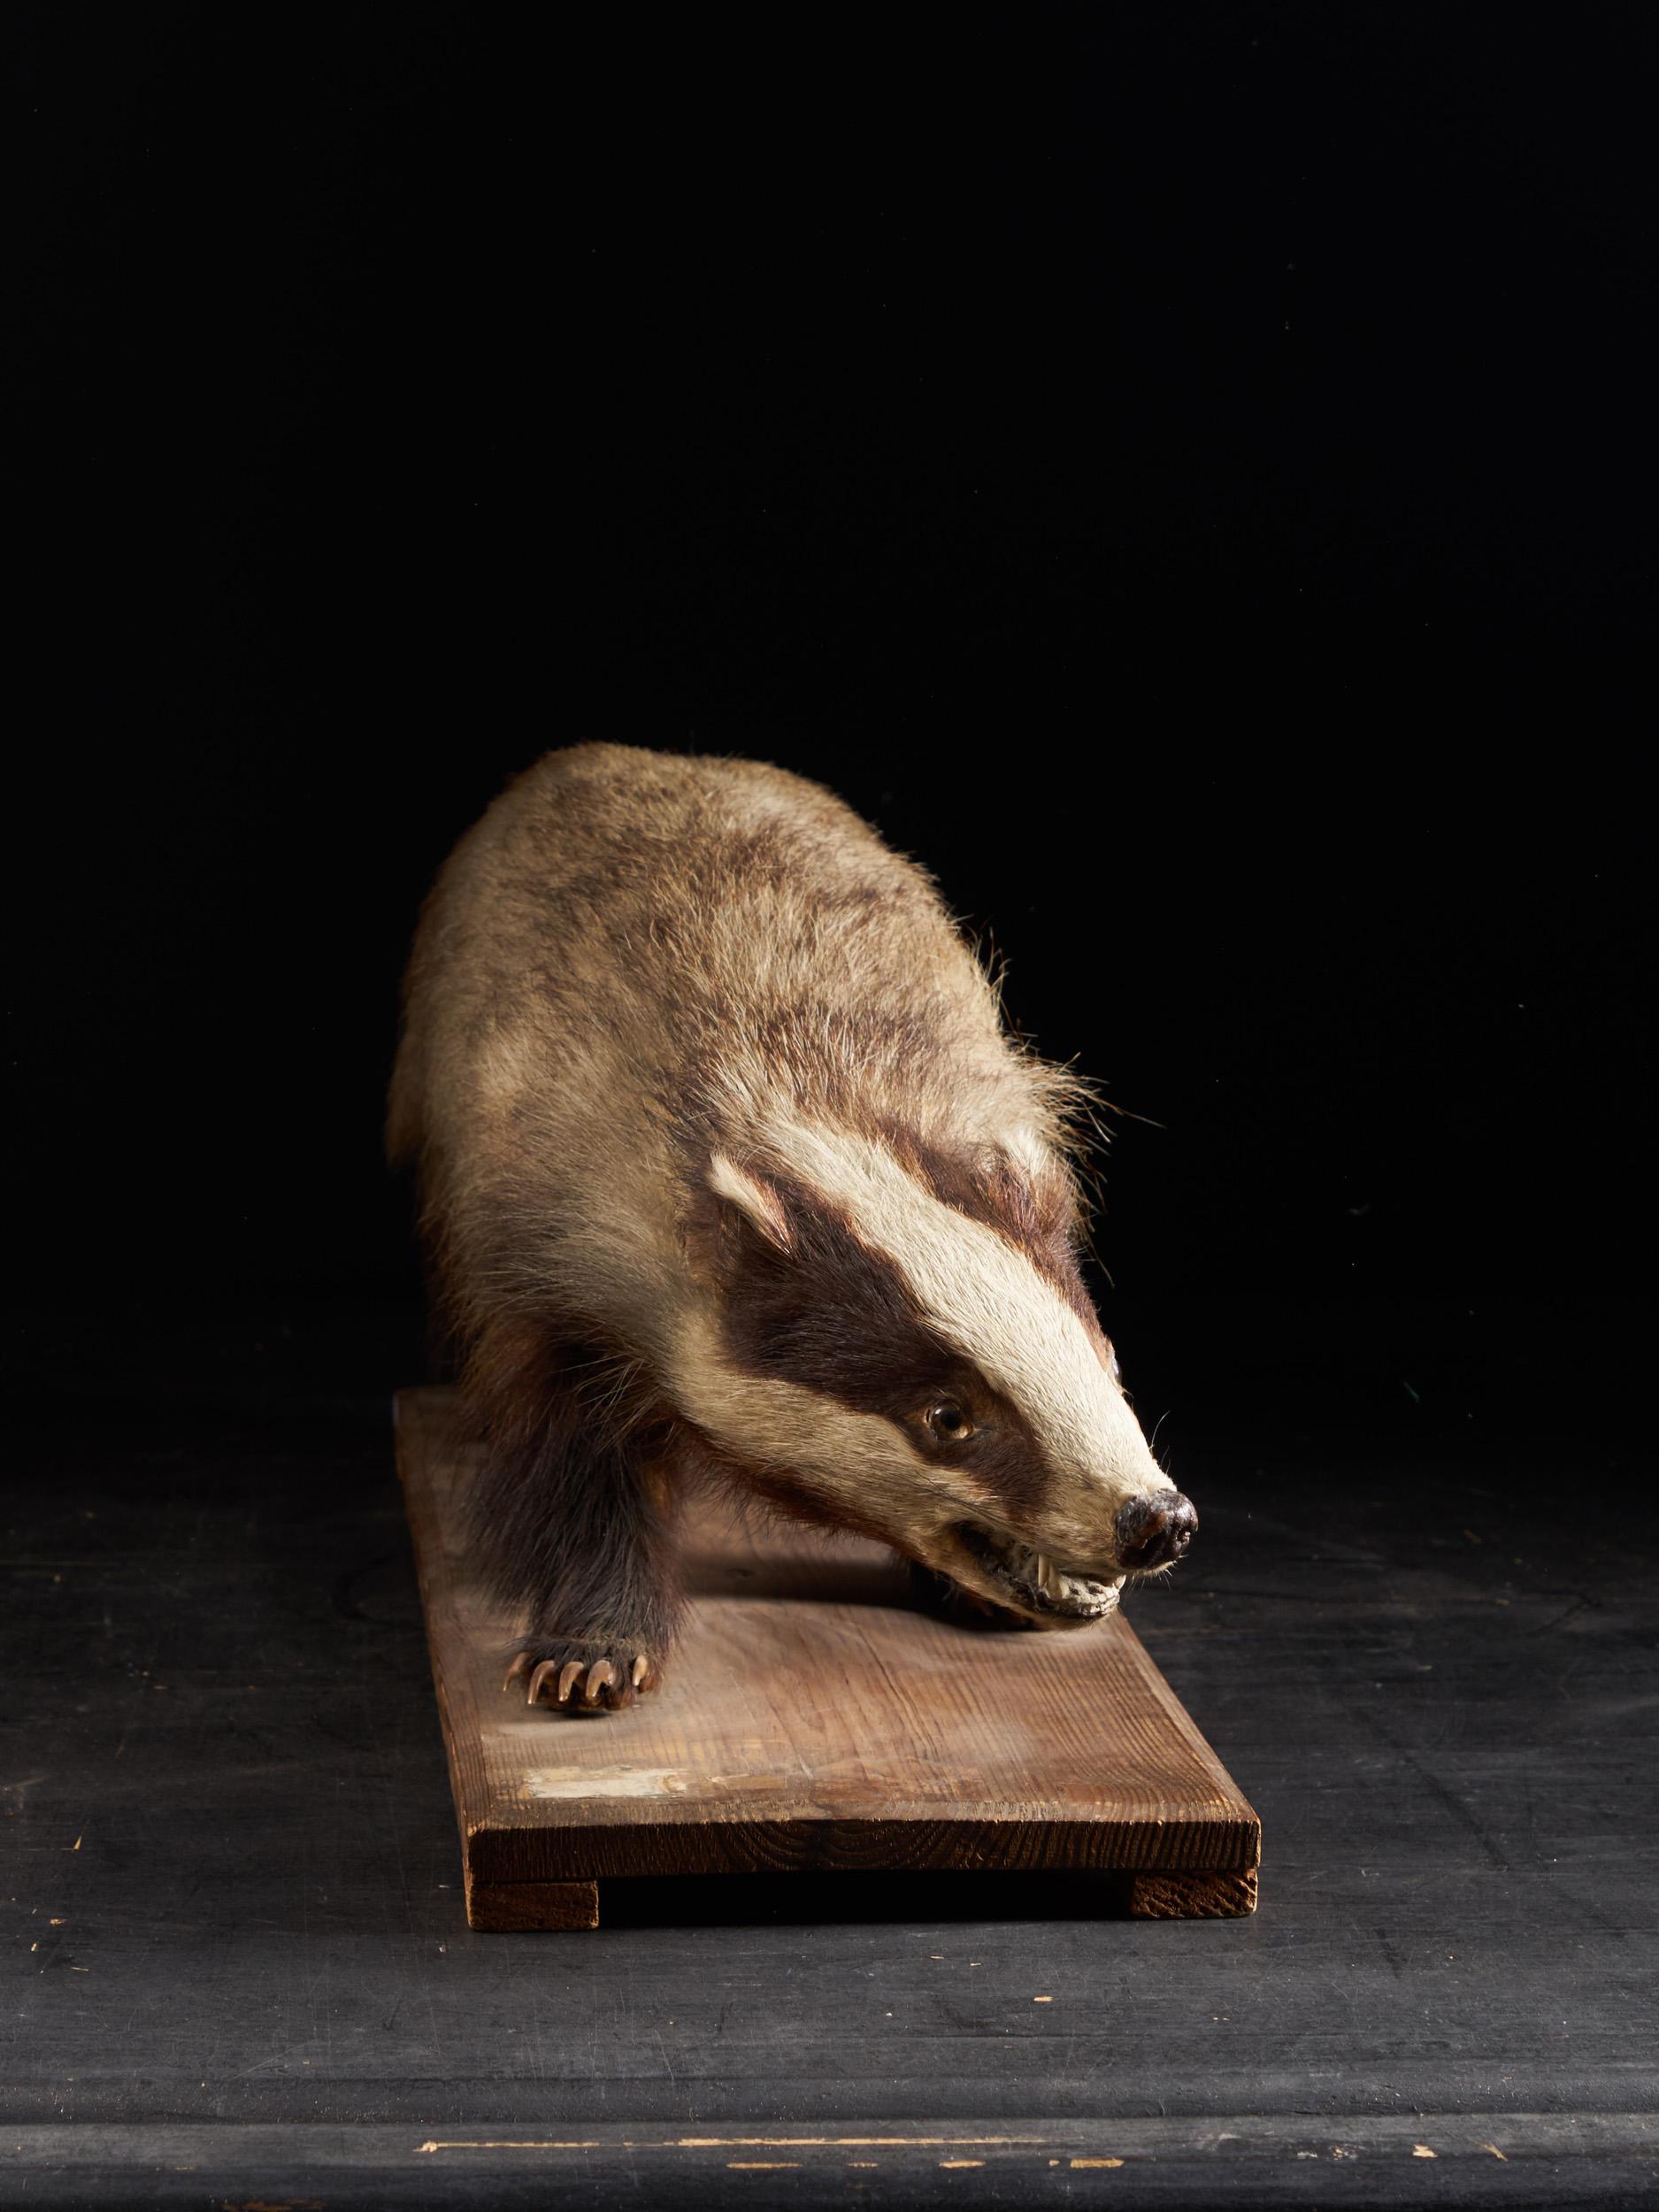 The Eurasian badger or European badger (Meles meles) is a social, omnivorous mammal that resides in woodlands, pastures, suburbs, and urban parks throughout most of Europe and Asia.